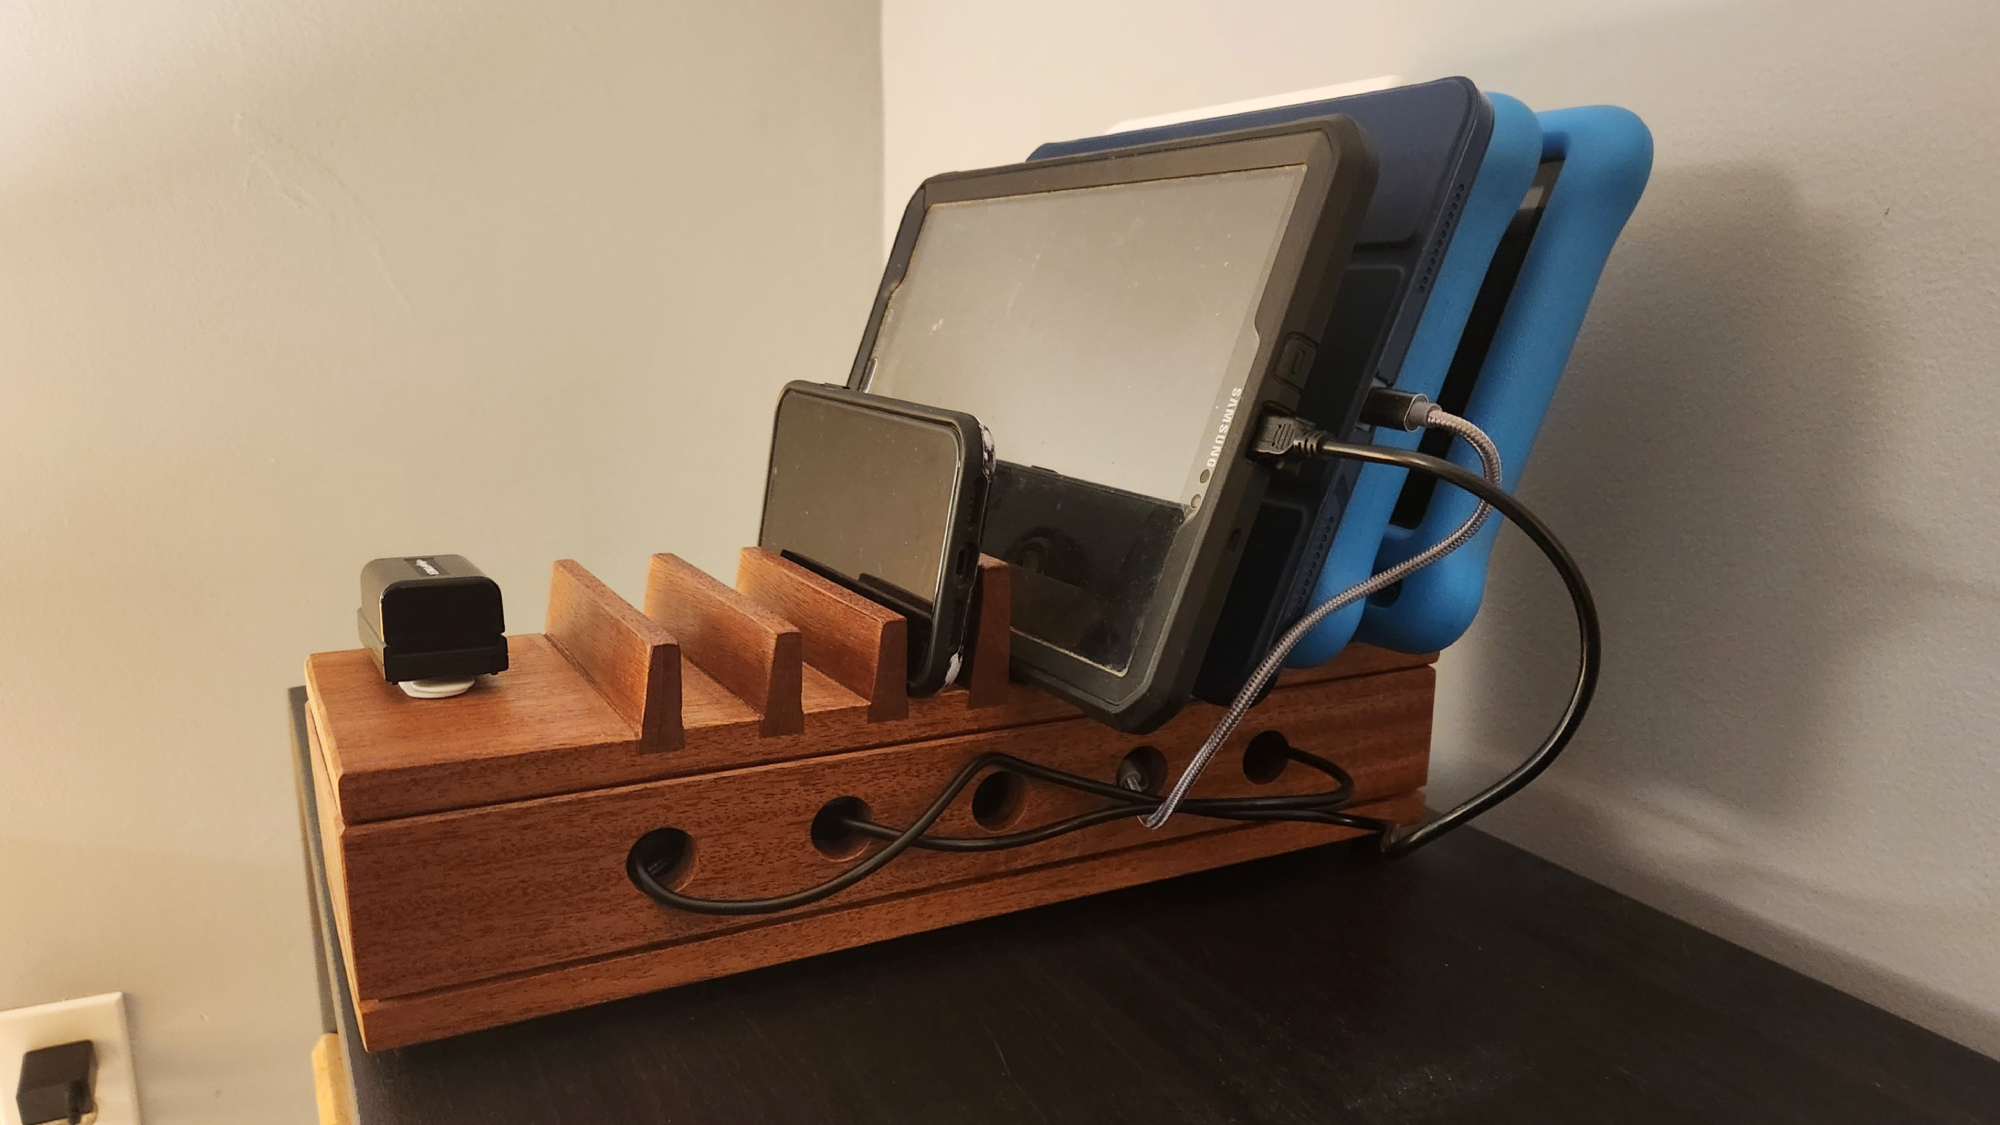 Locked Charging Station to Prevent Kids' Smartphone 